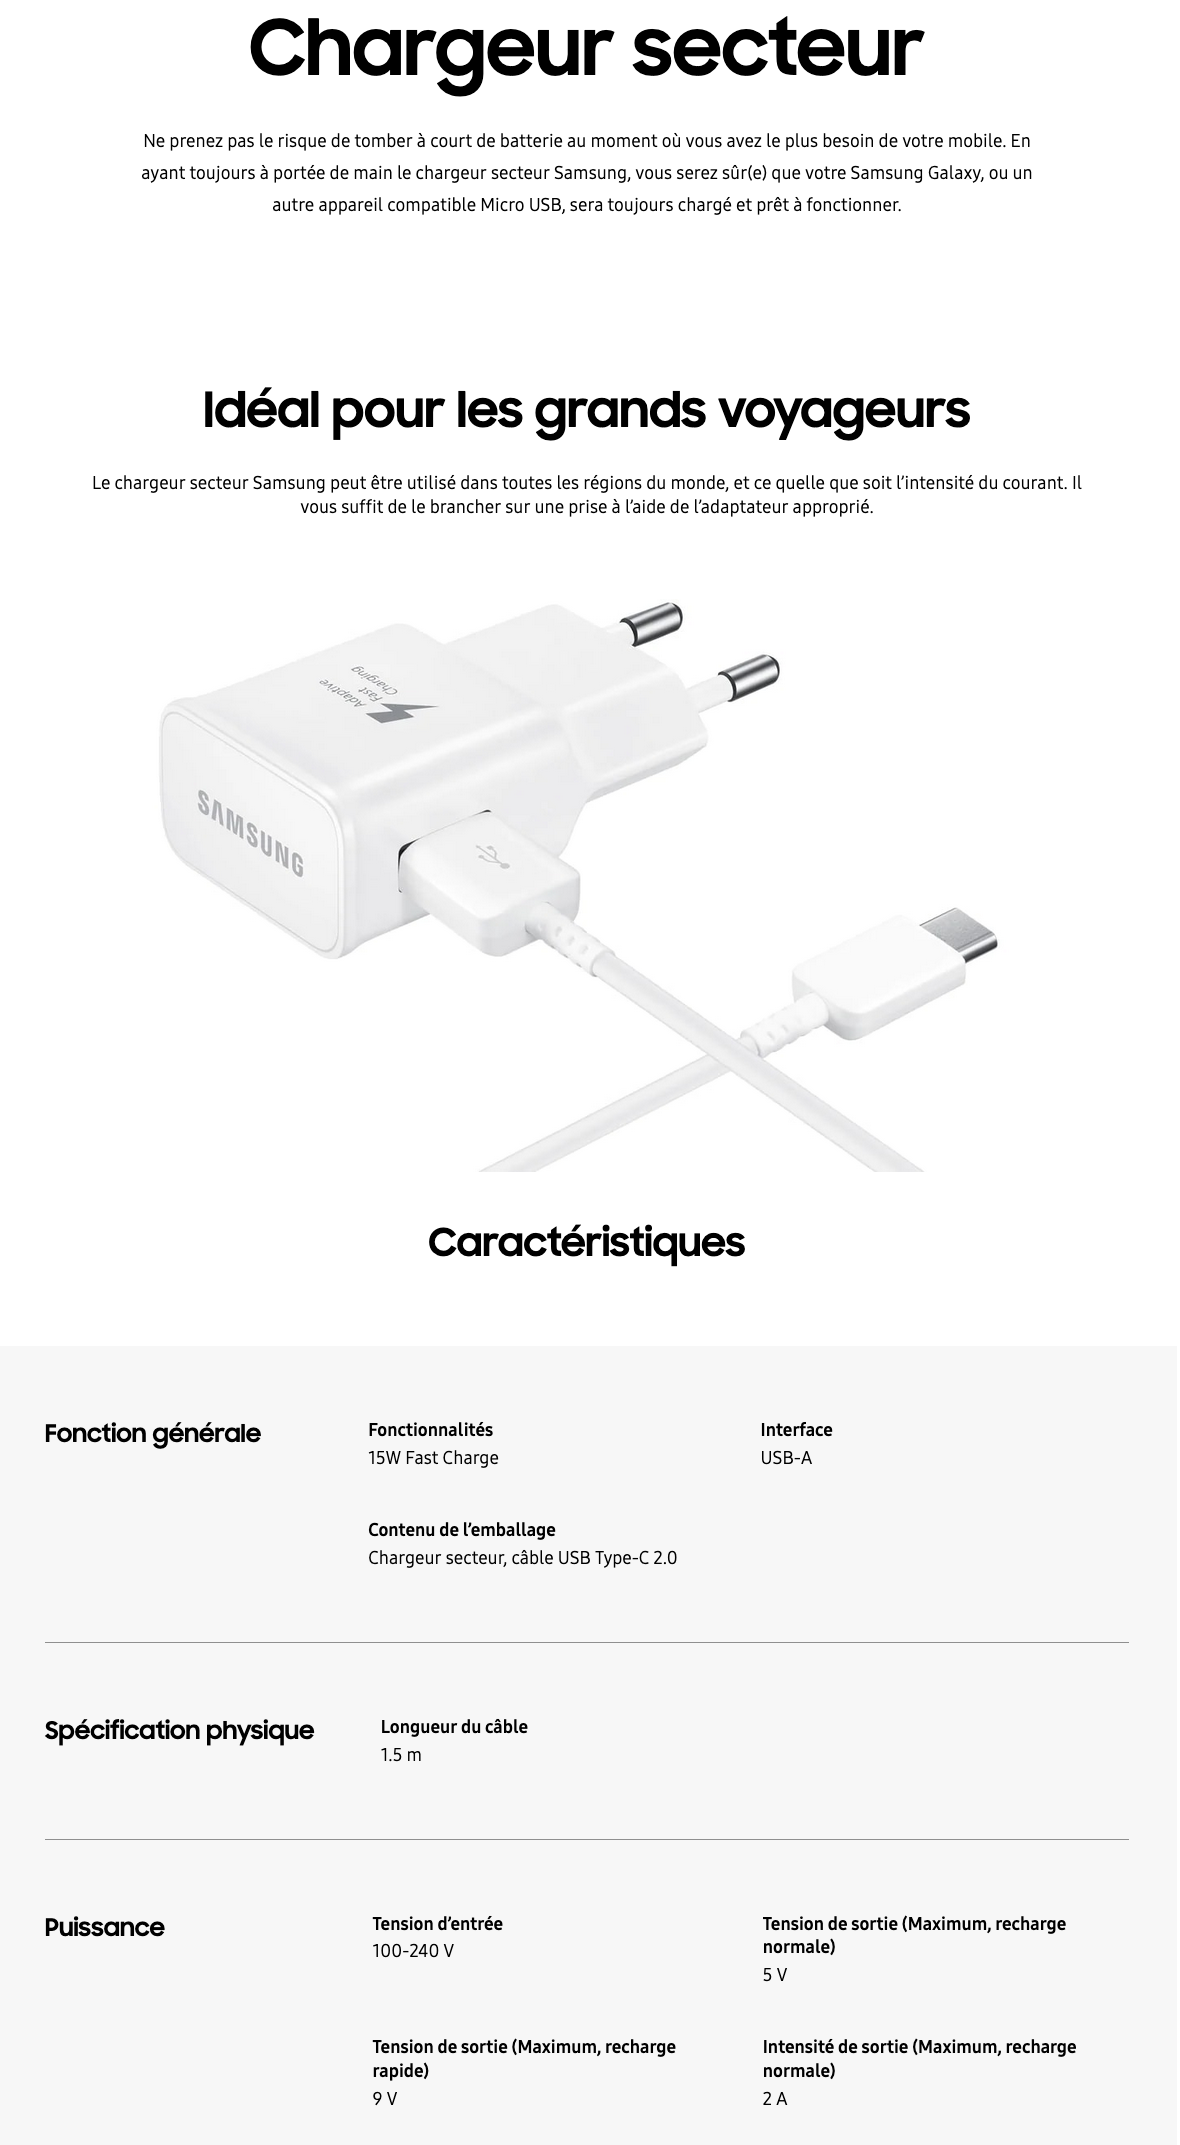 Chargeur Samsung chargement rapide Micro USB